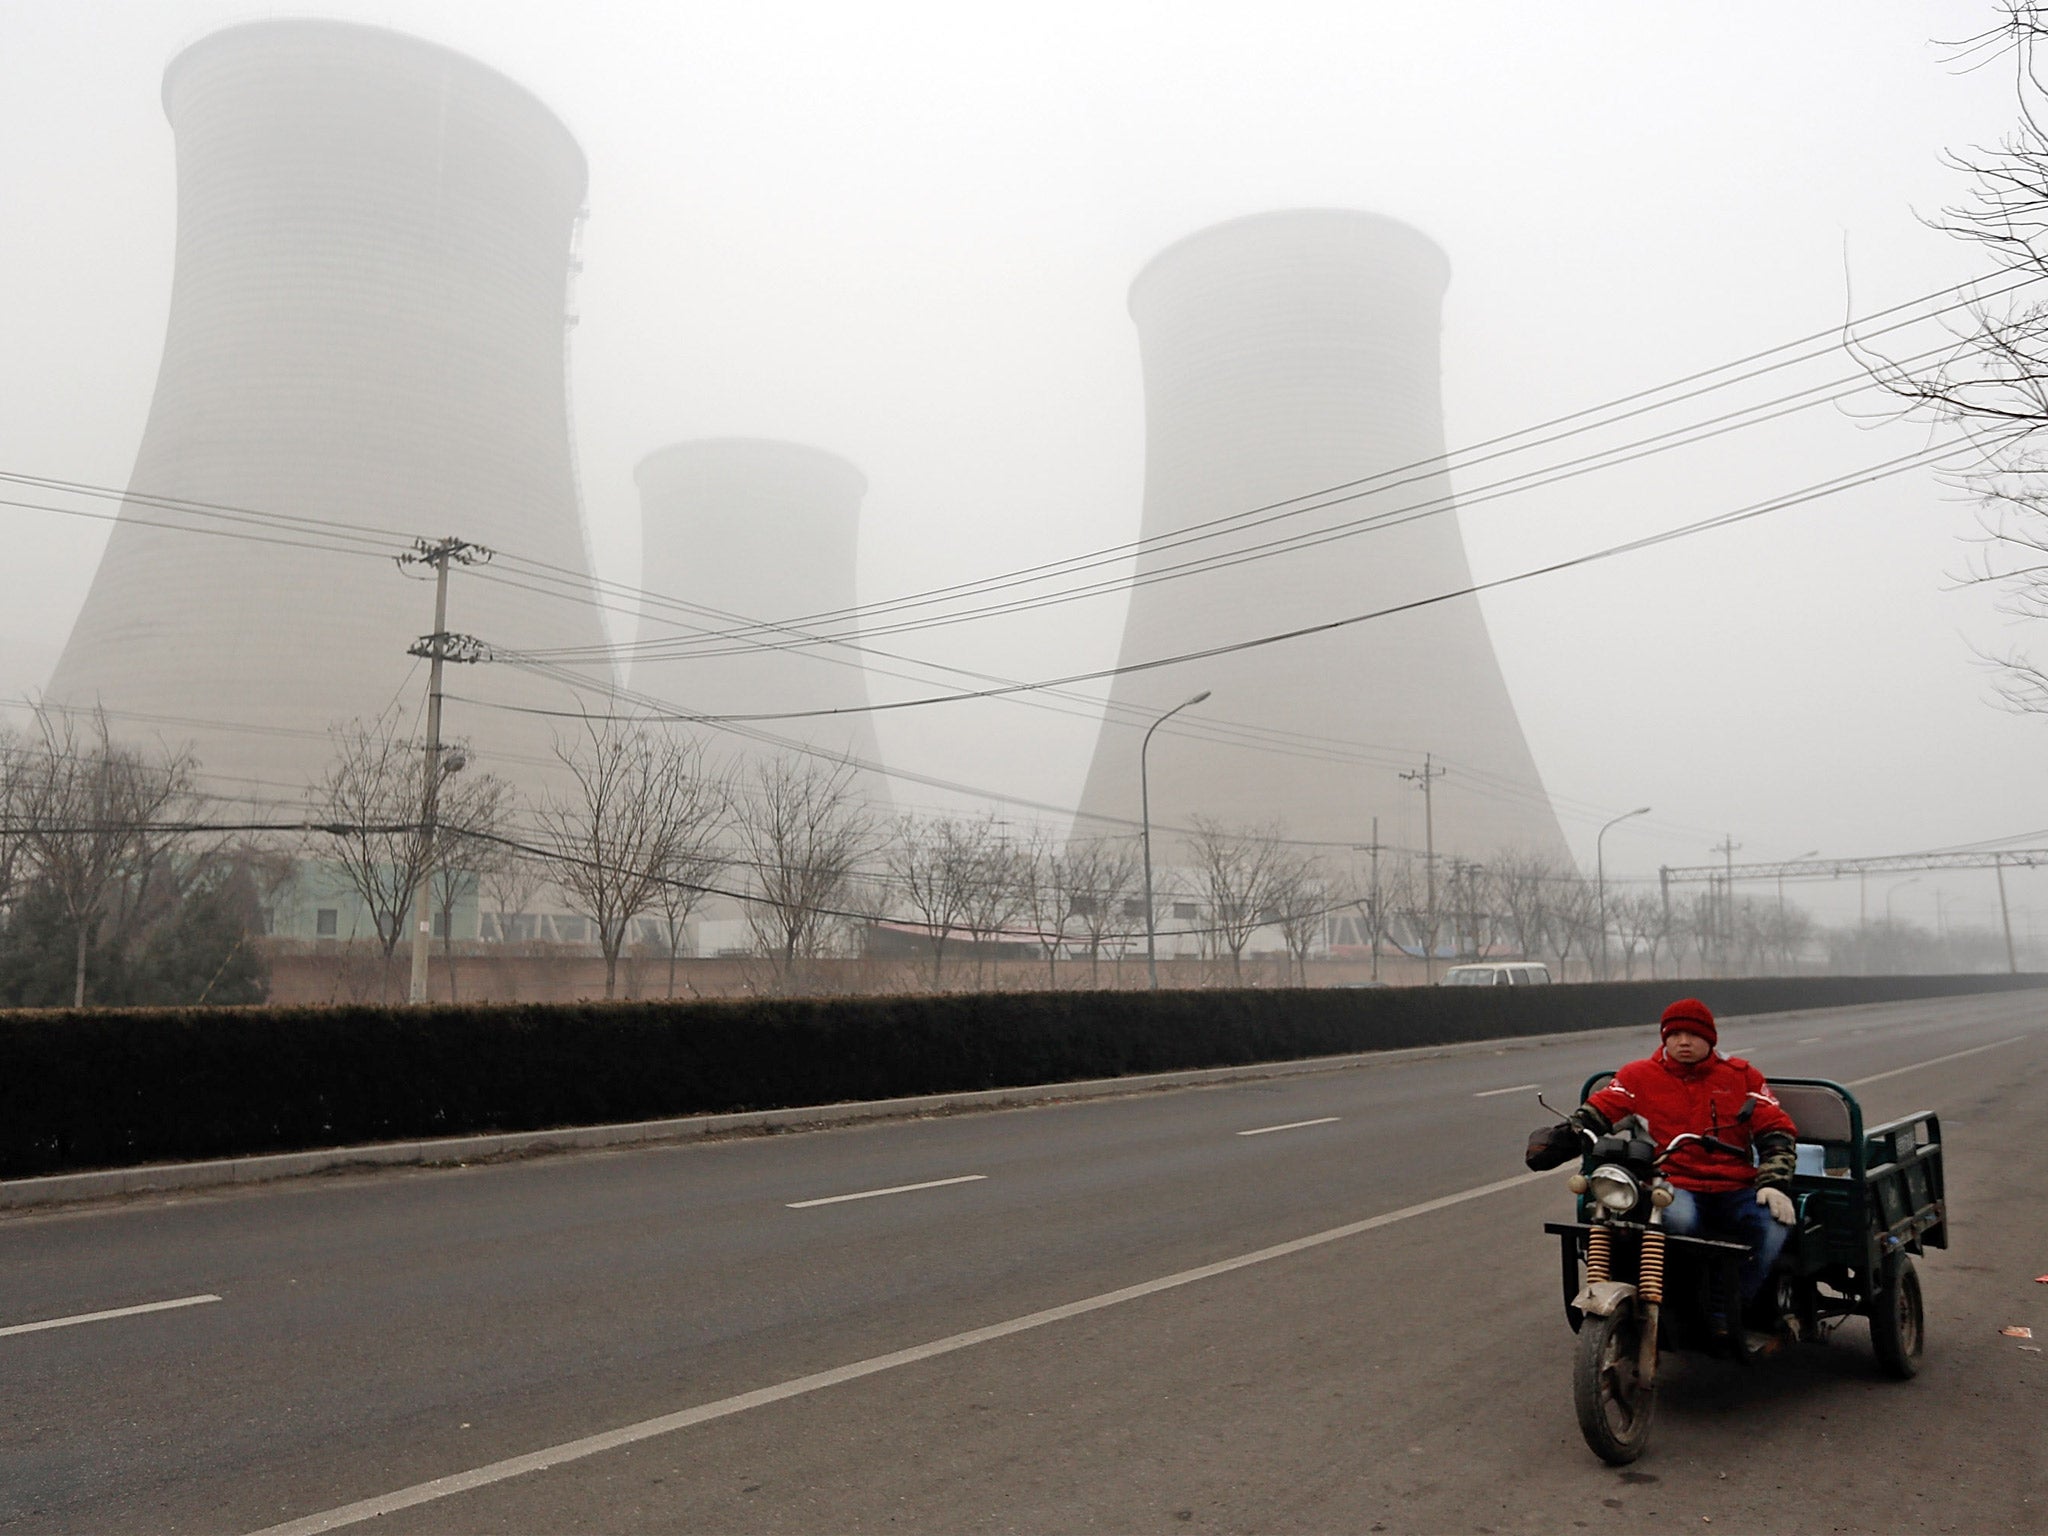 A men rides a three-wheeled motorcycle past power station chimneys. Heavy industry is the main cause of the pollution